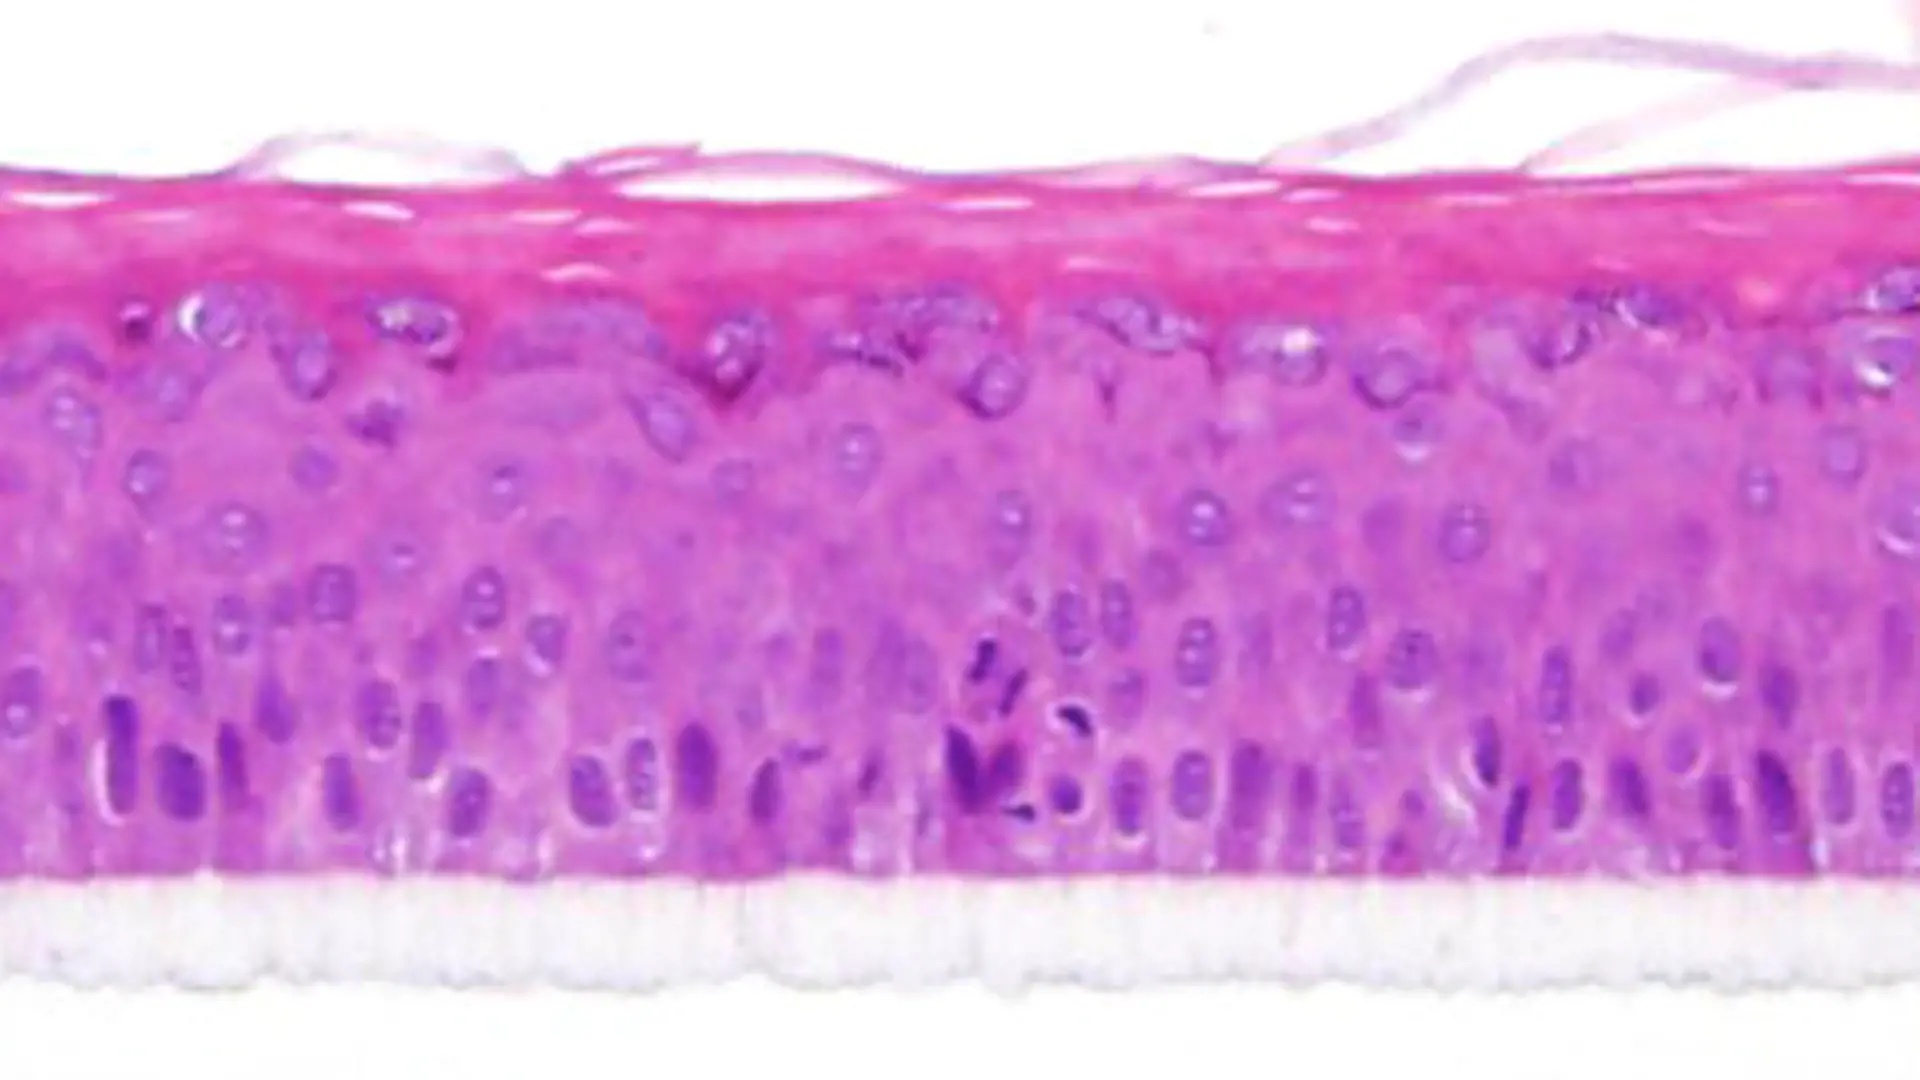 Microscopic picture of an epiCS® skin model